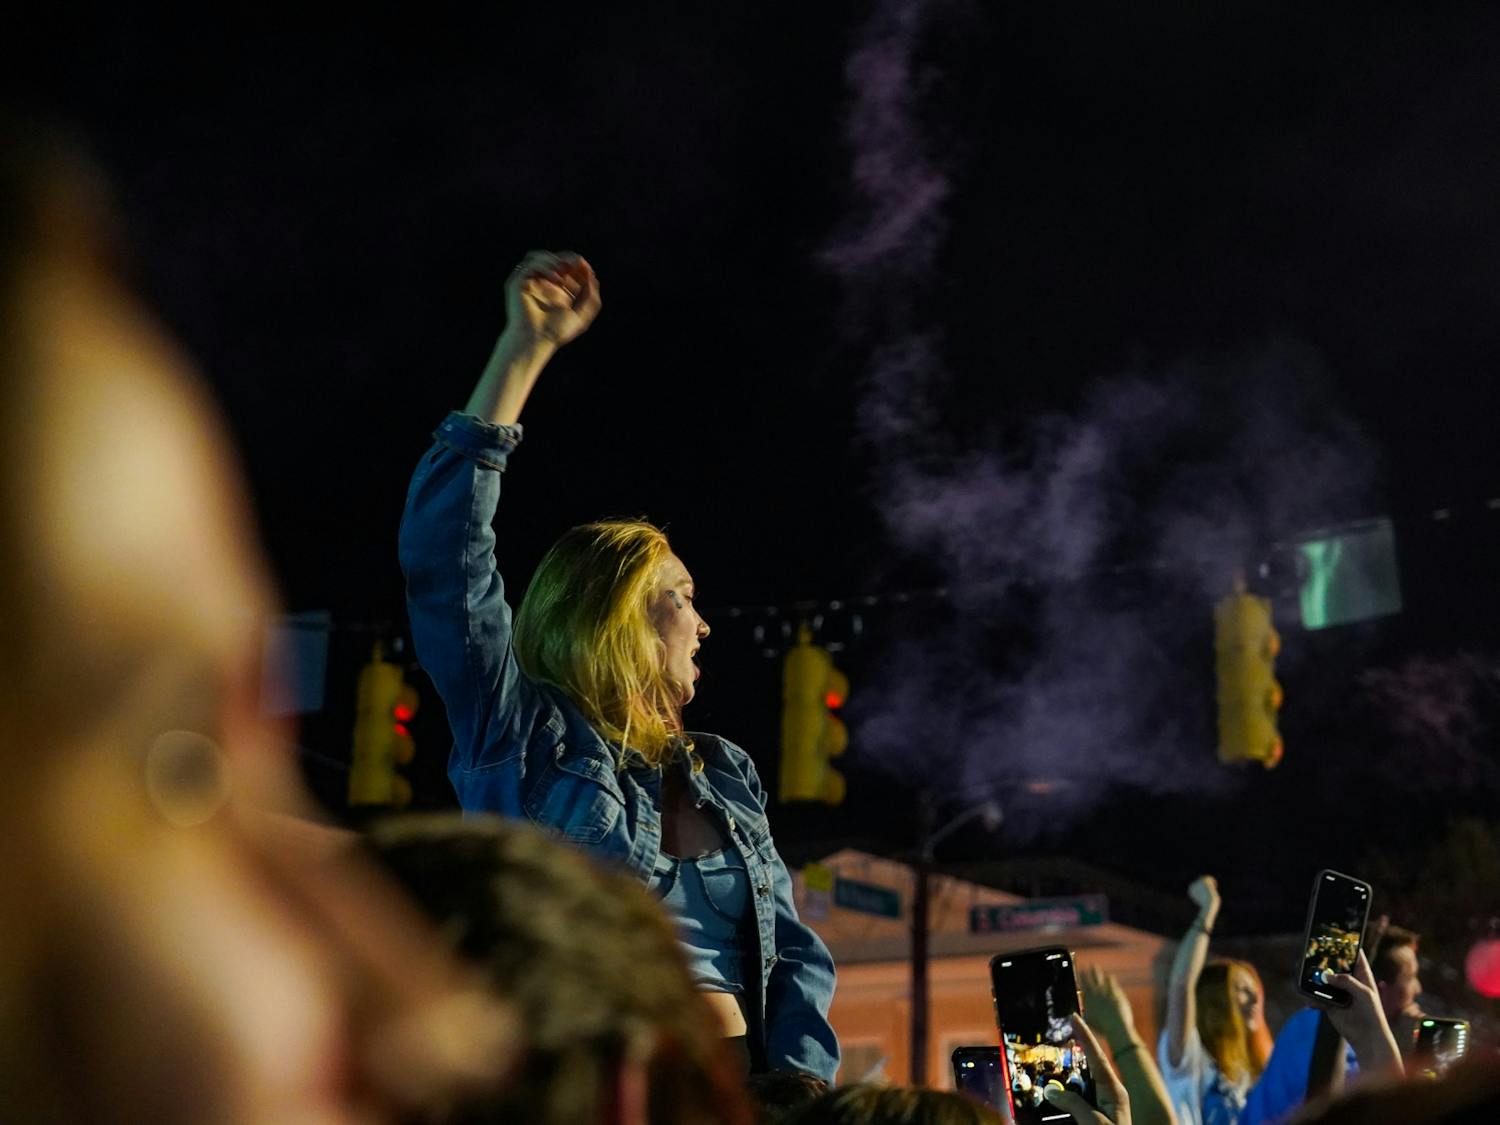 A UNC Chapel Hill fan is lifted onto someone's shoulders at the intersection of E. Franklin St and Columbia St and celebrates the team's triumph over Duke in the 2022 Final Four matchup on April 3, 2022. UNC beat Duke 81-77. Photo courtesy of Morgan Pirozzi.